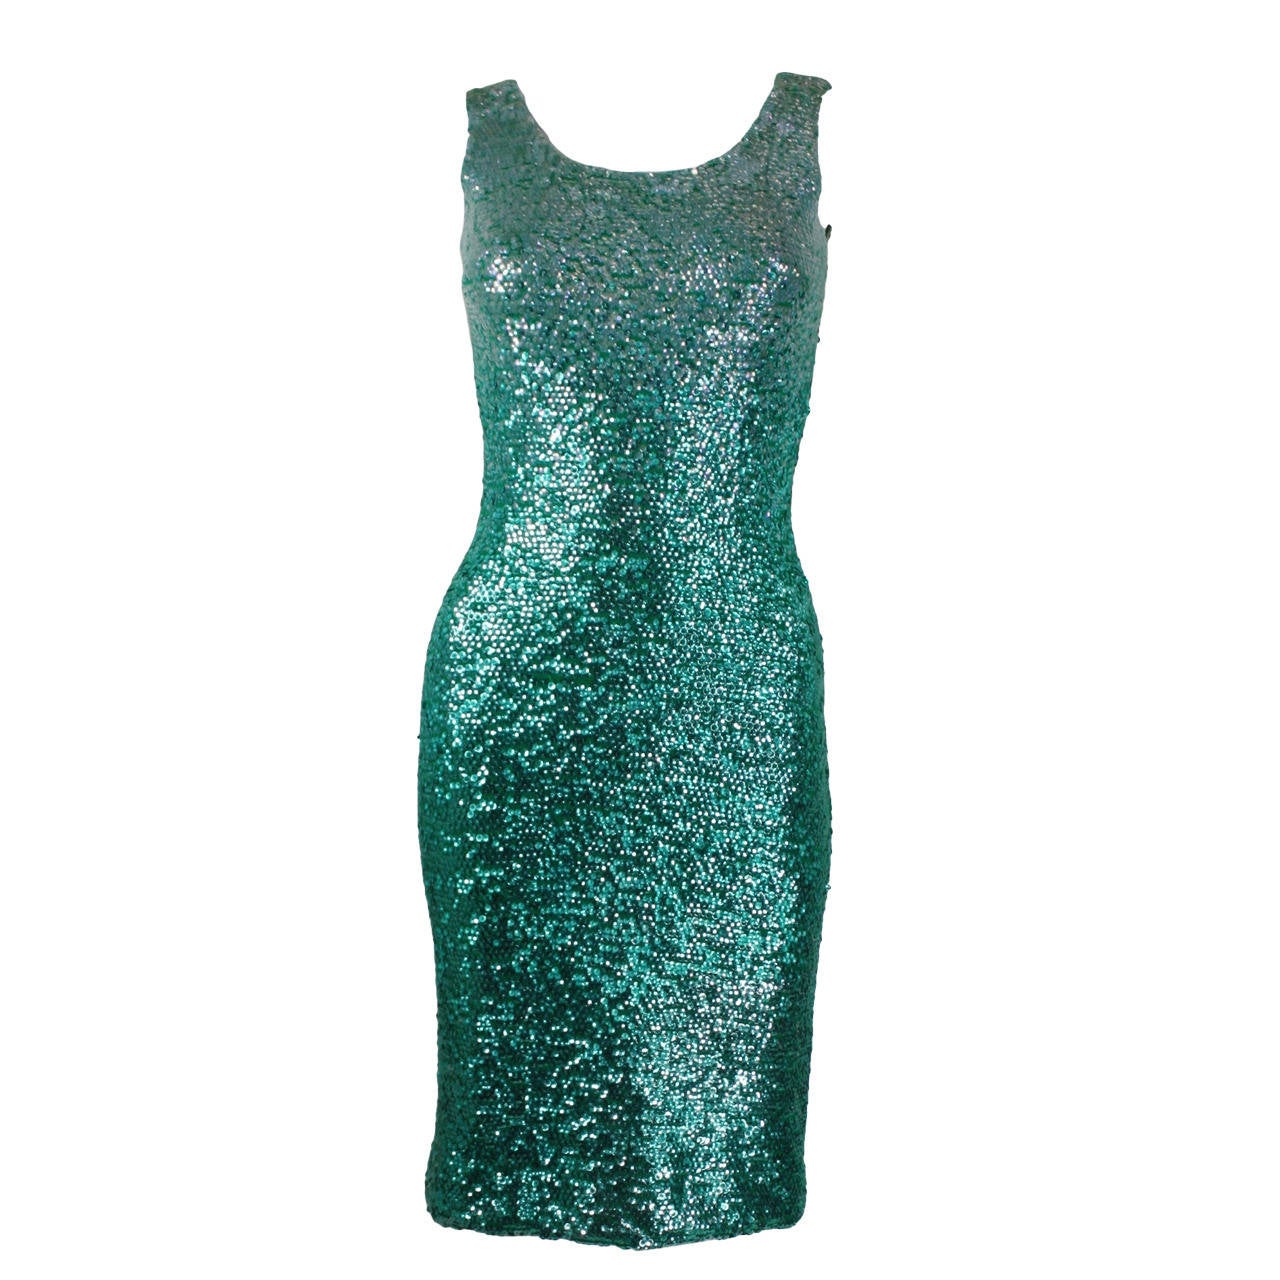 1960s Peacock Green Sequined Knit Dress